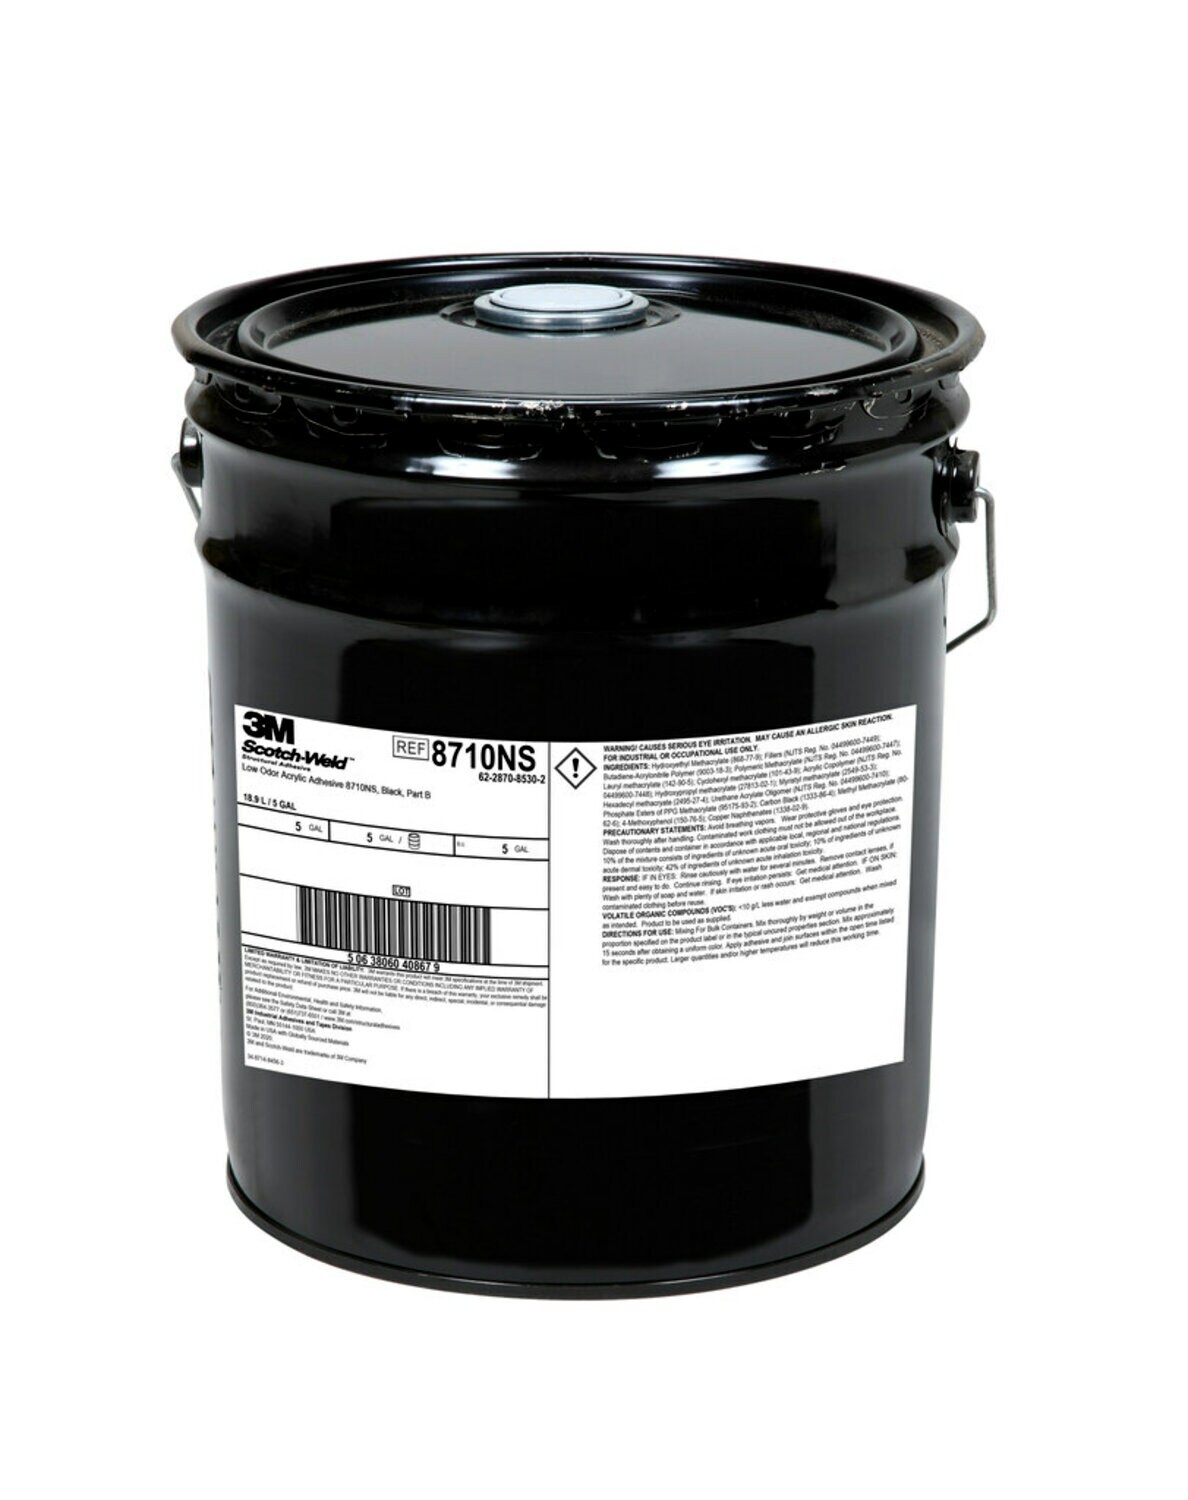 https://www.e-aircraftsupply.com/ItemImages/97/1974899E_3m-scotch-weld-low-odor-acrylic-adhesive-8710ns-5gal-single-image.jpg